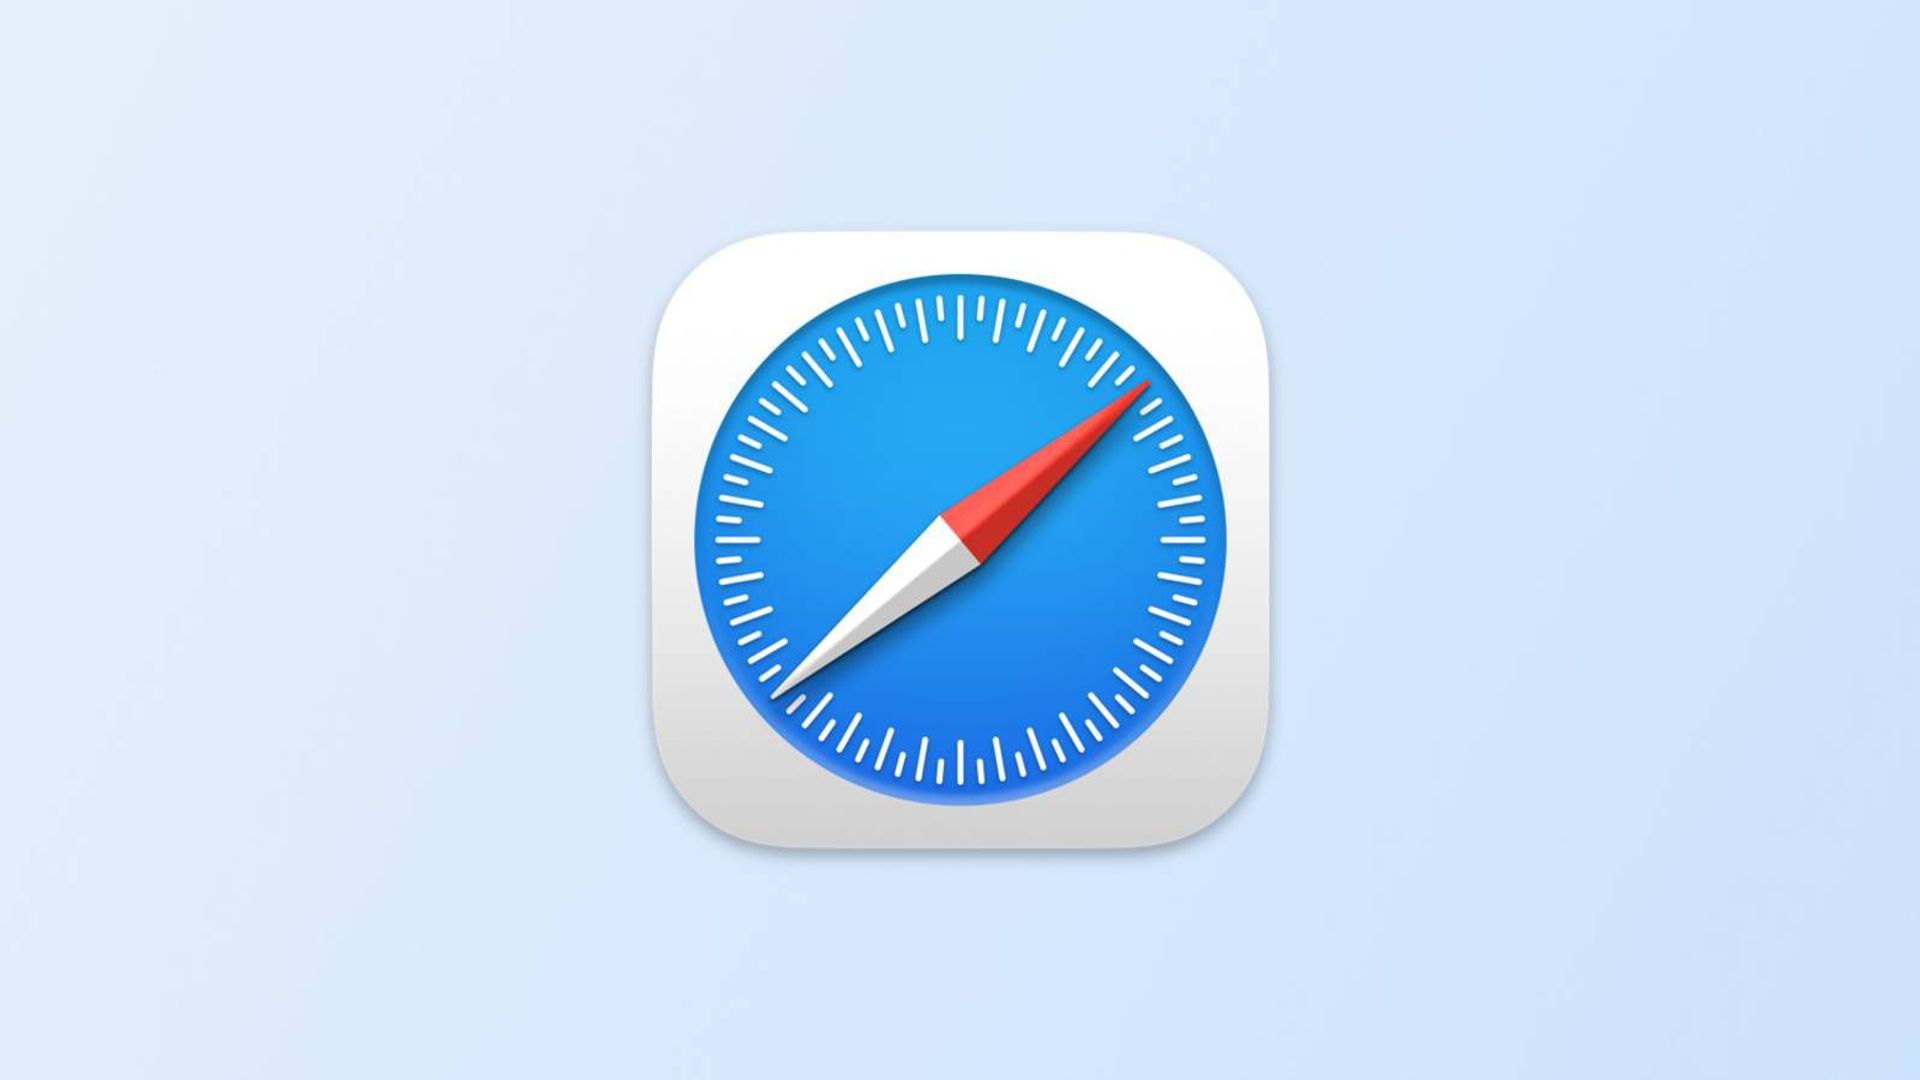 Apple Safari Browser Icon in blue, on a light blue background